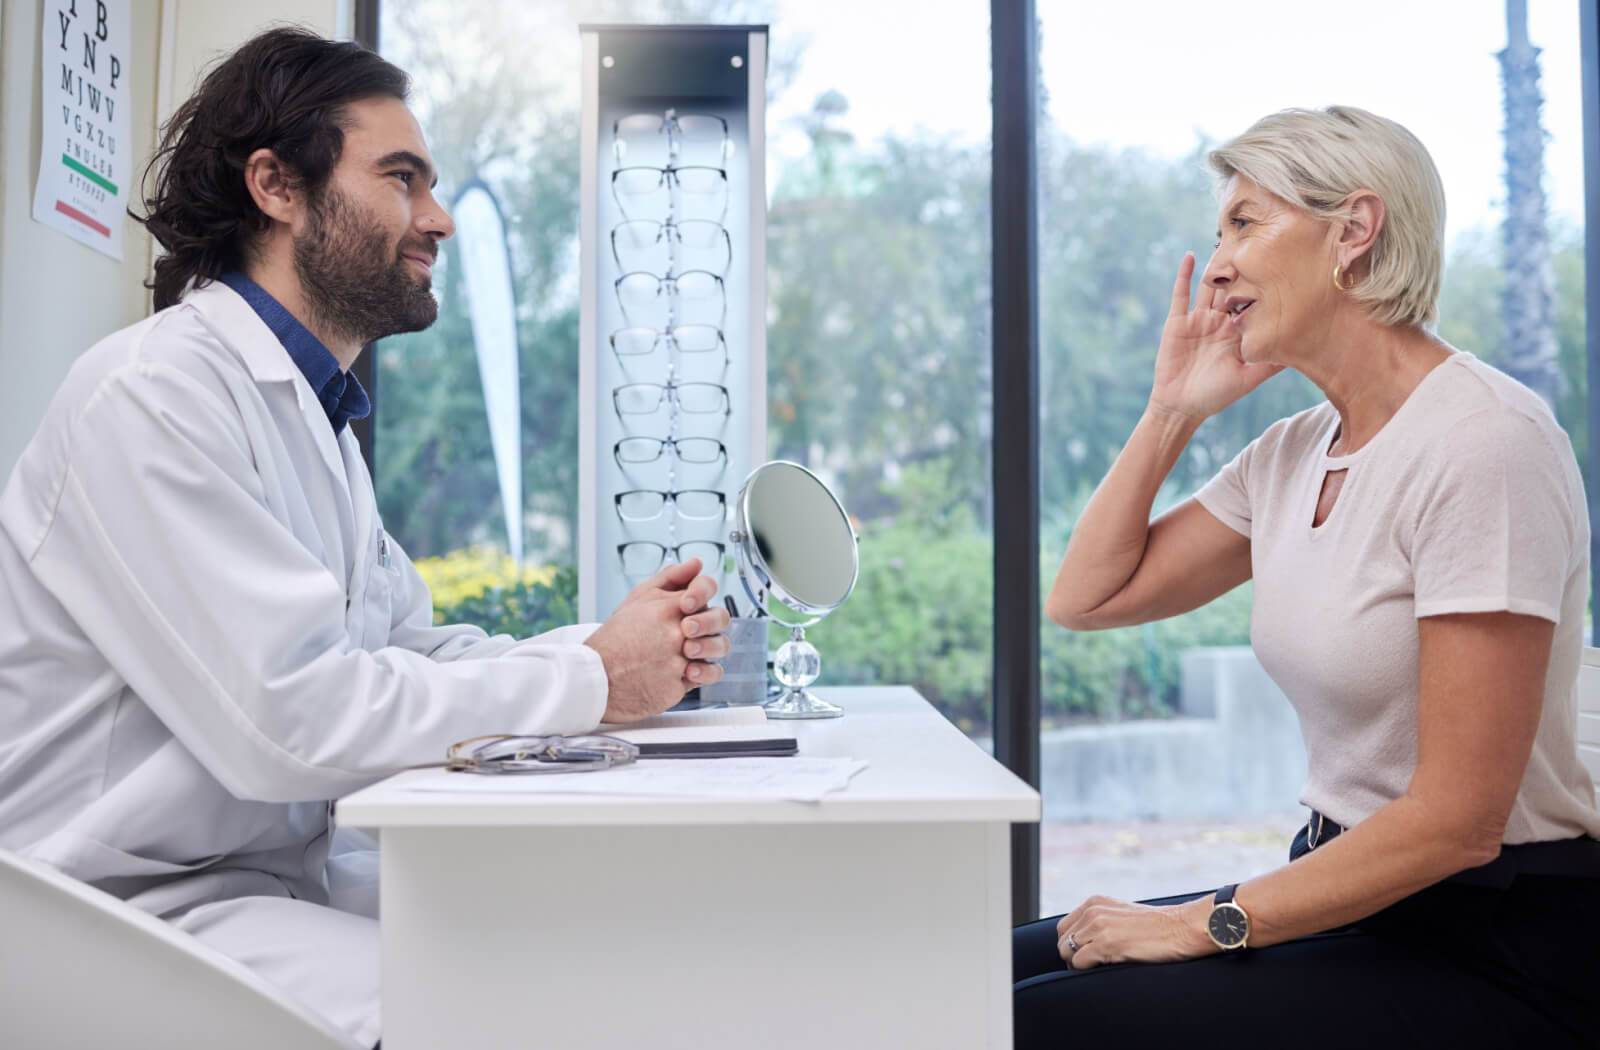 An optometrist talking to a female patient in an optical clinic.